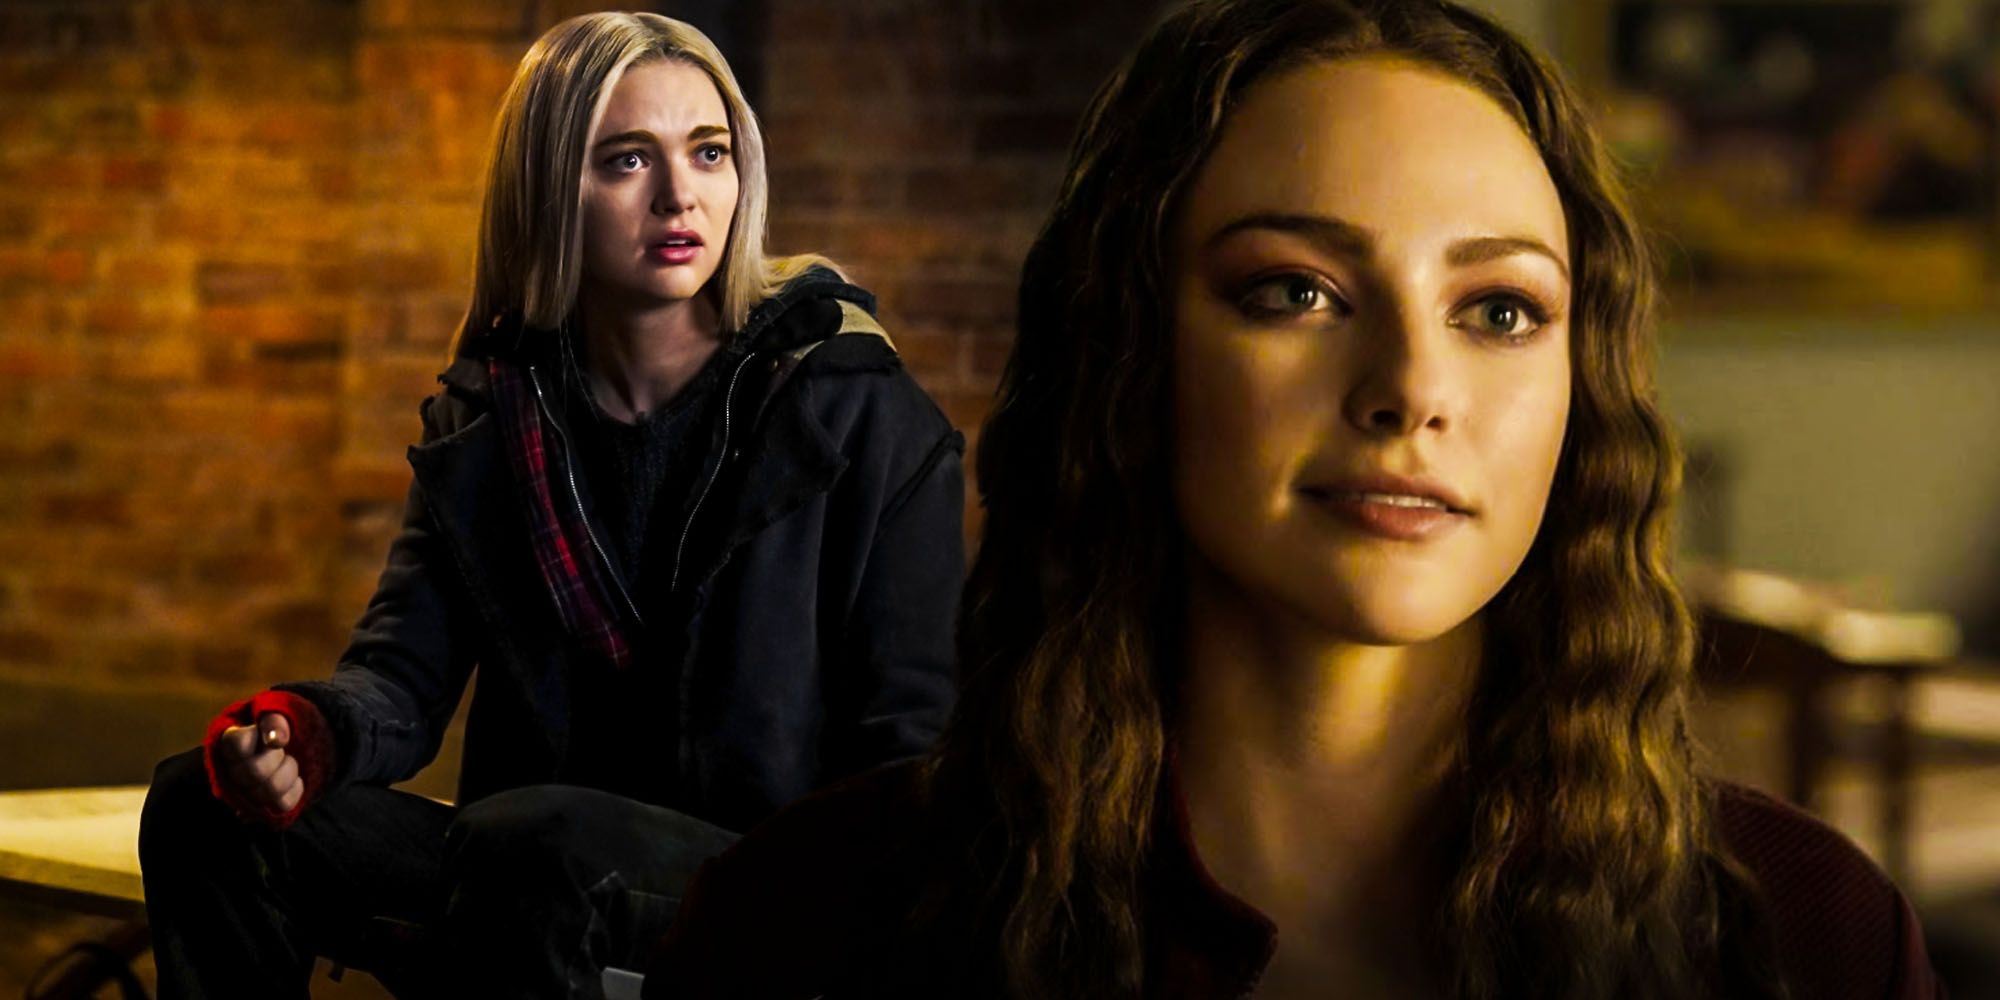 Why Legacies Was Canceled (Where The Vampire Diaries Series Went Wrong)